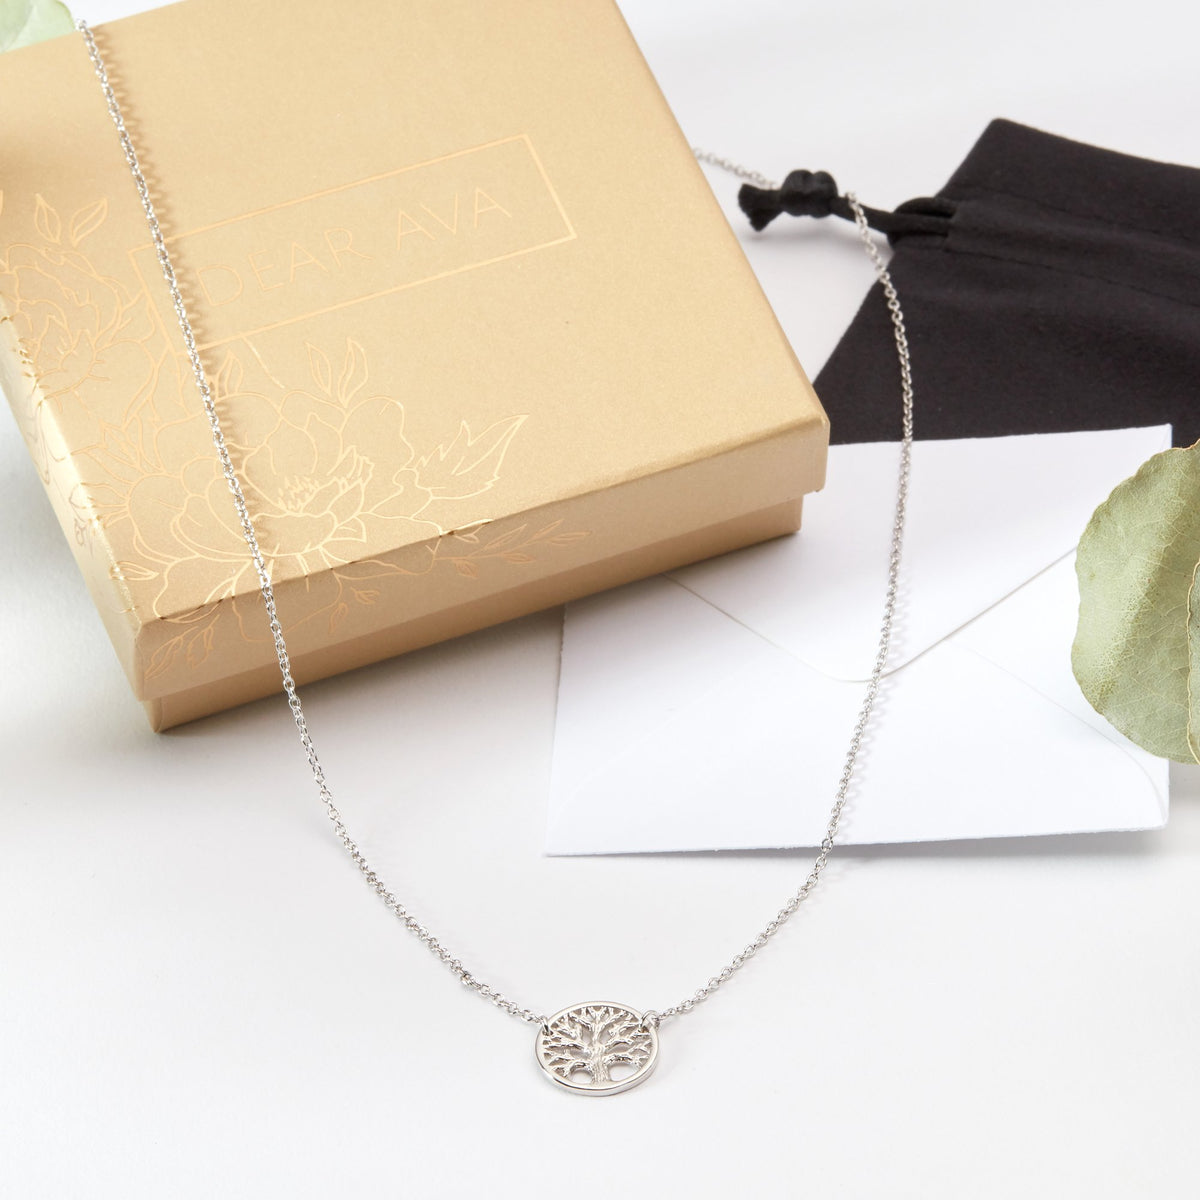 Great Grandmother Tree of Life Necklace